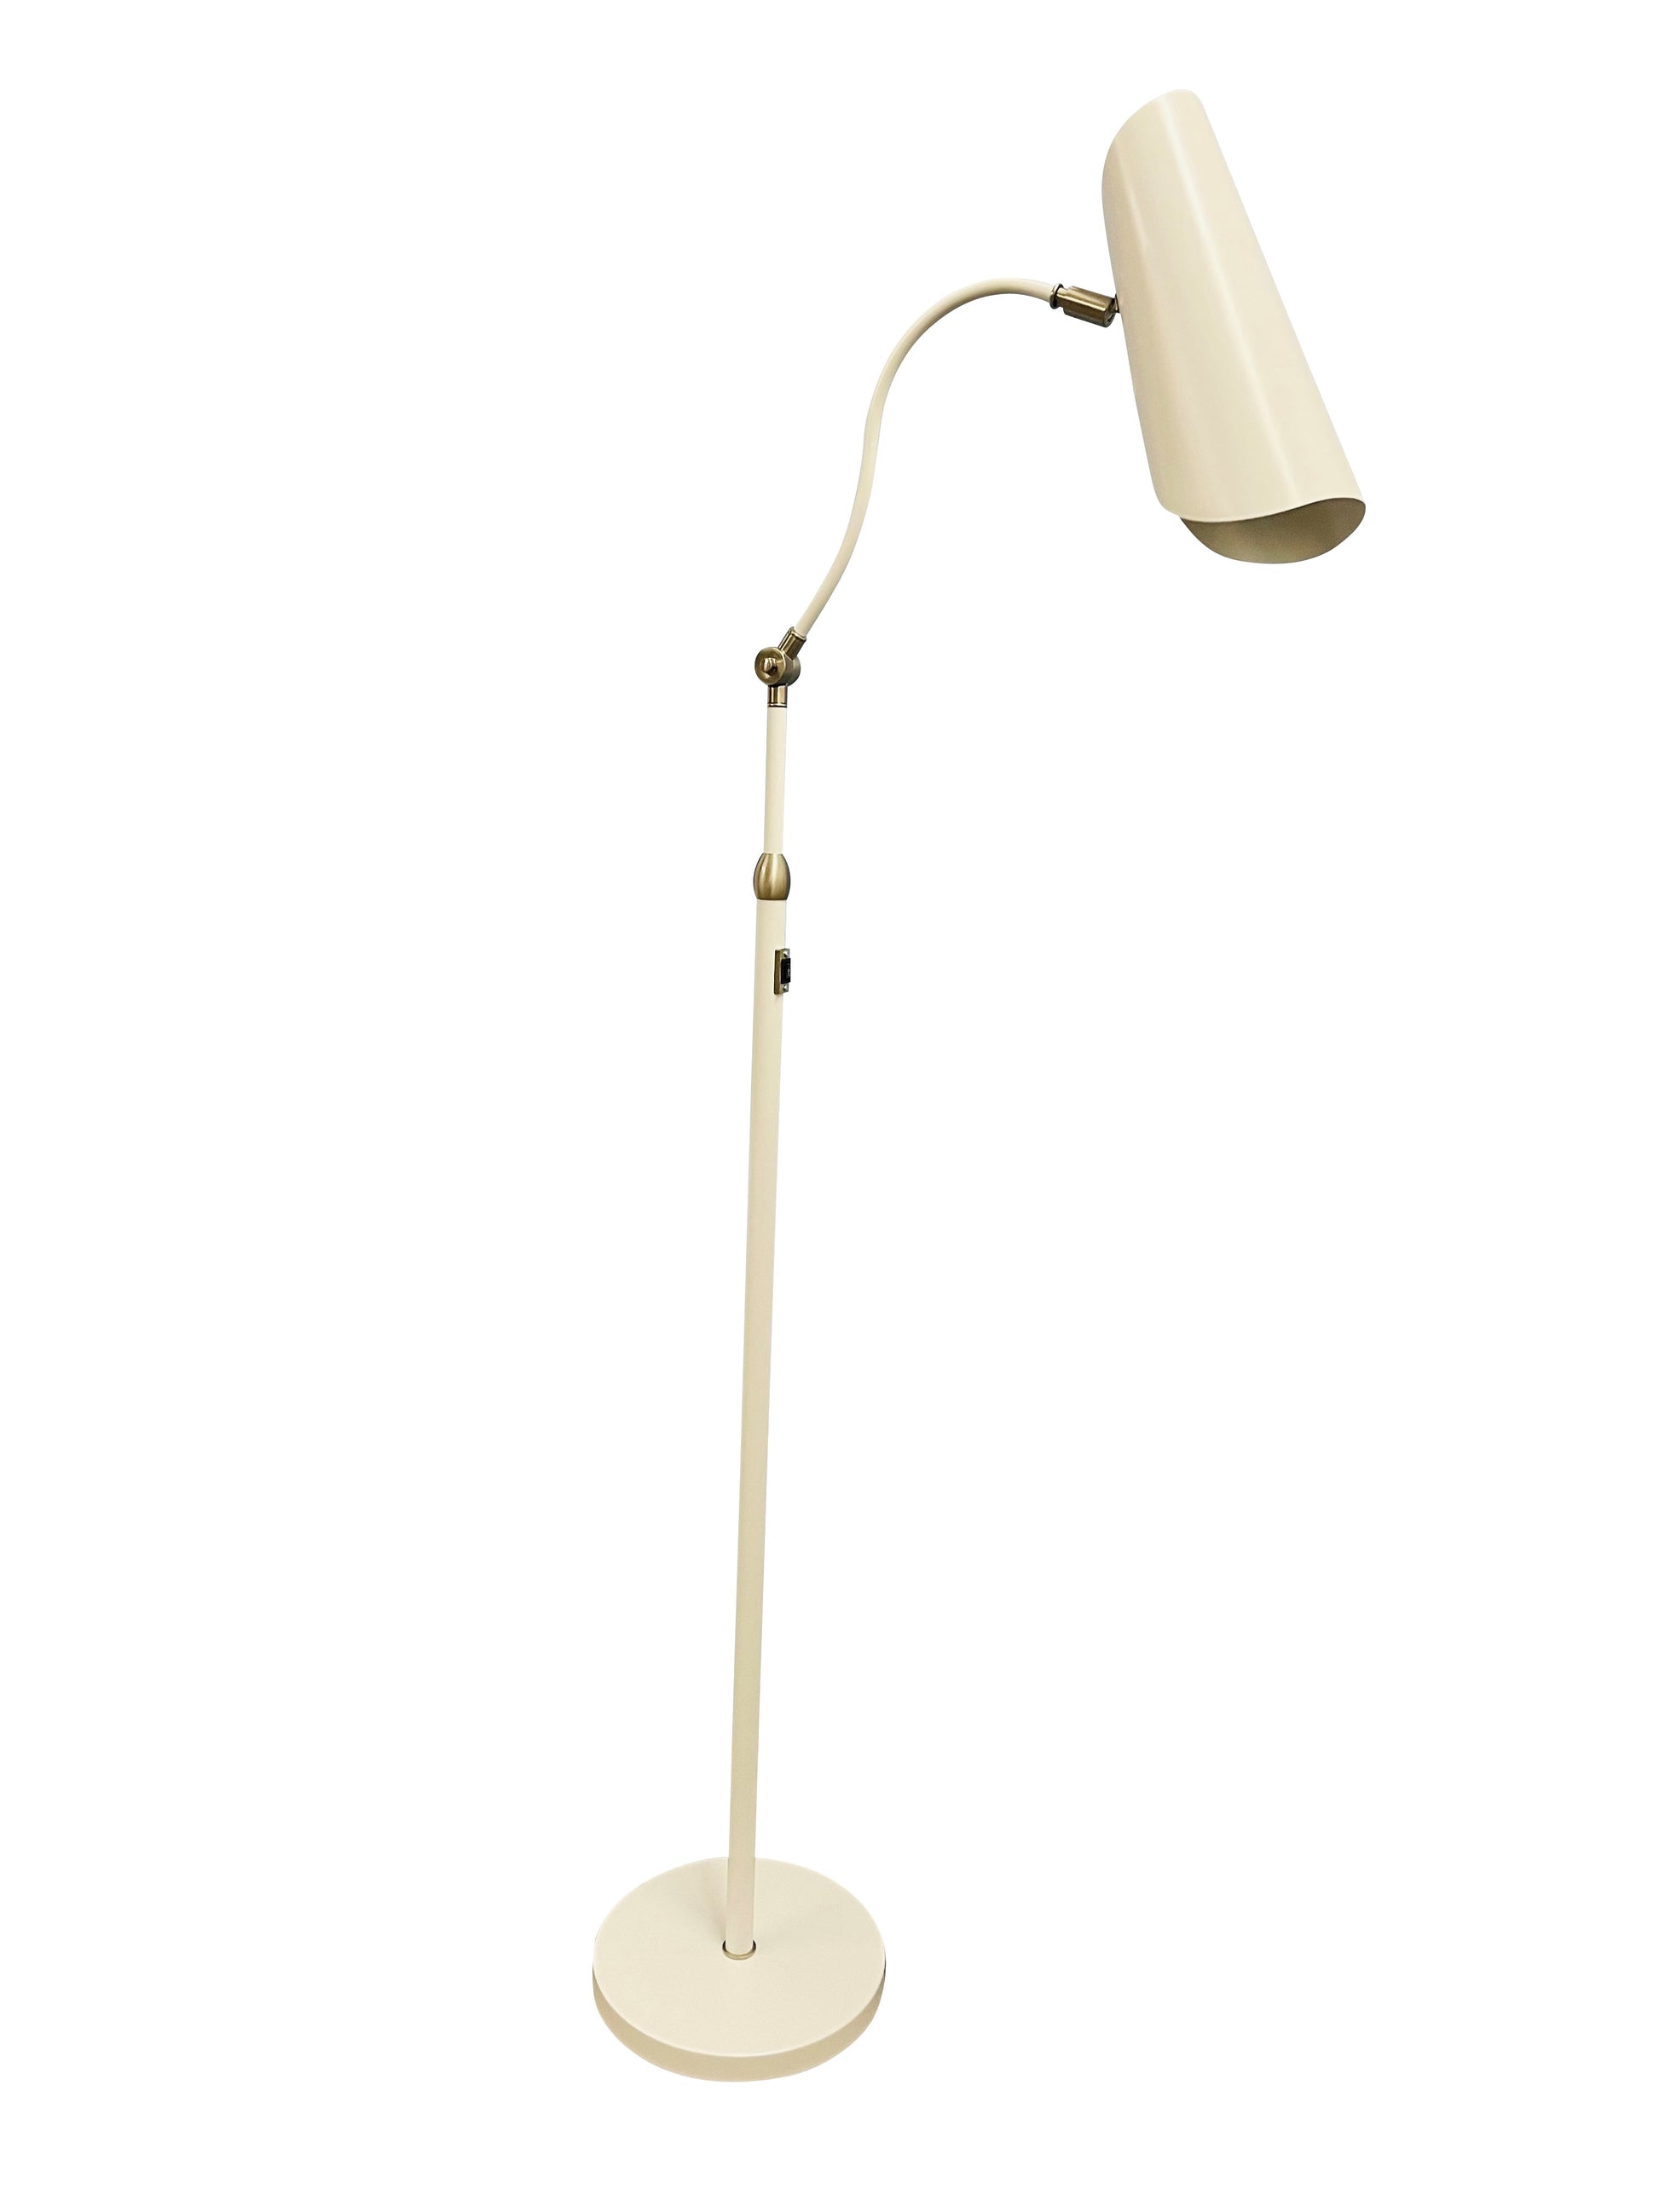 House of Troy Logan White/Satin Nickel Floor Lamp with rolled shade L300-WTSN